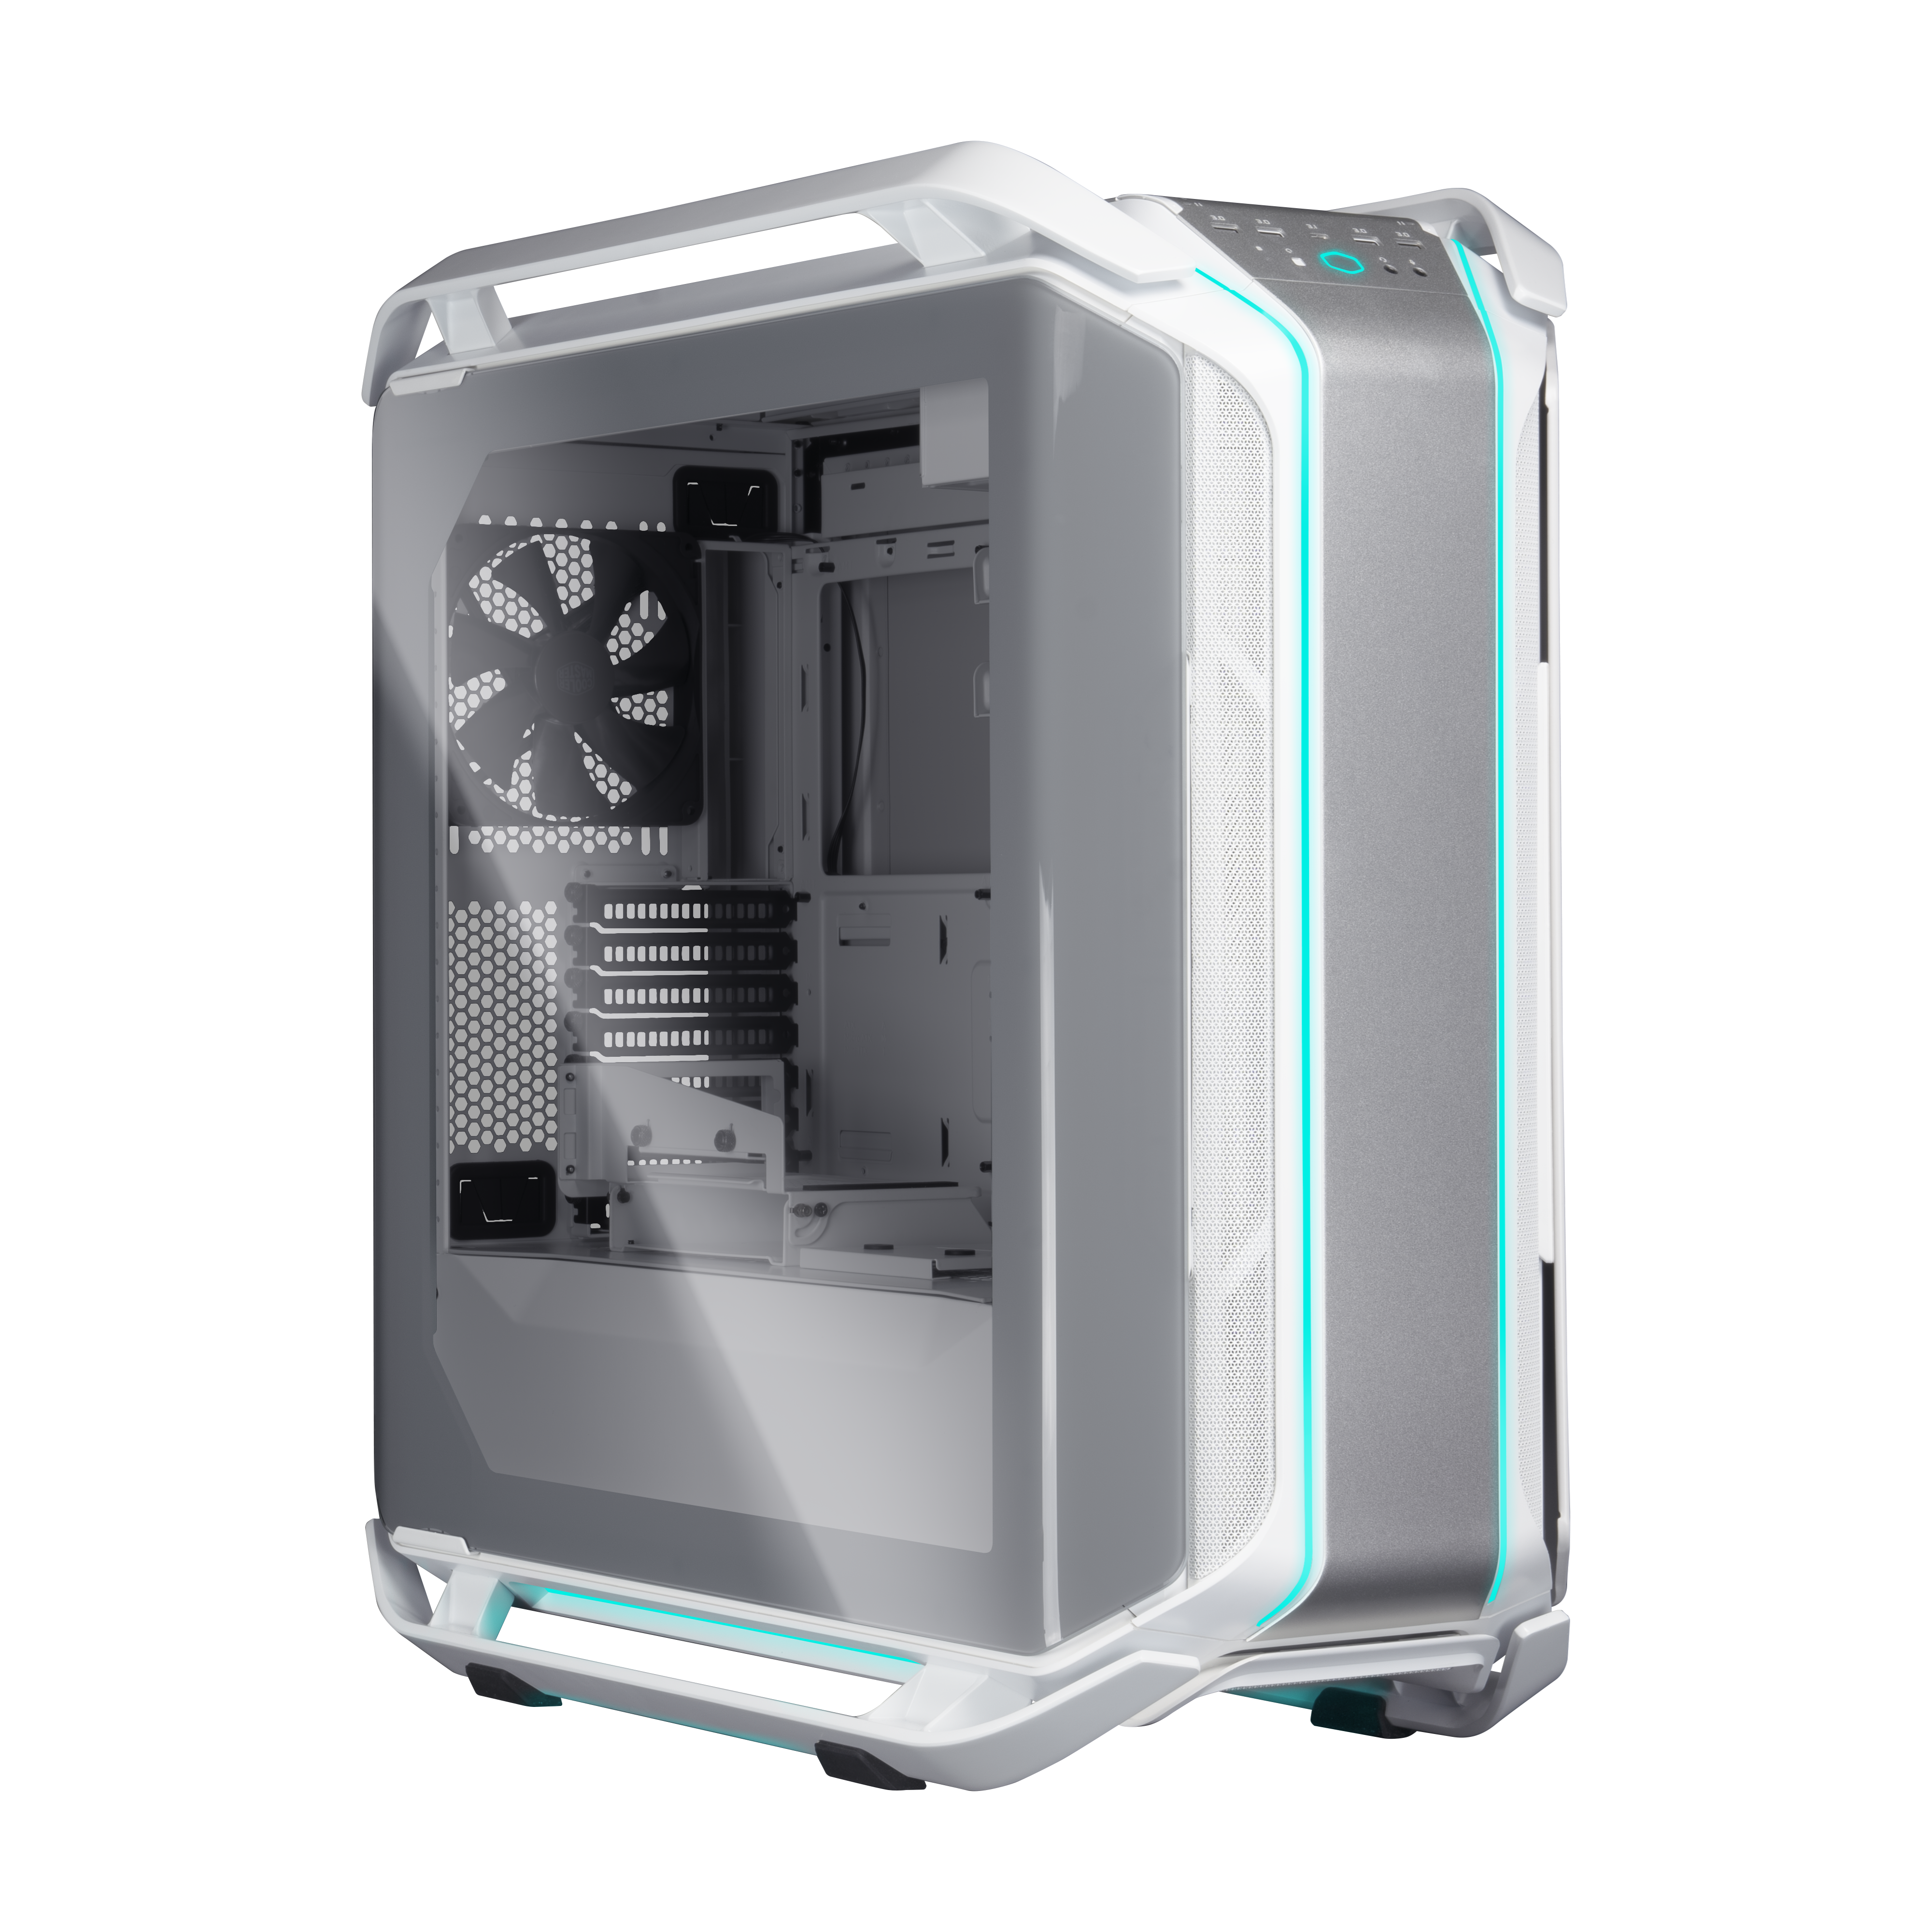 Cooler Master COSMOS C700M | ATX Tempered Glass Case (White)